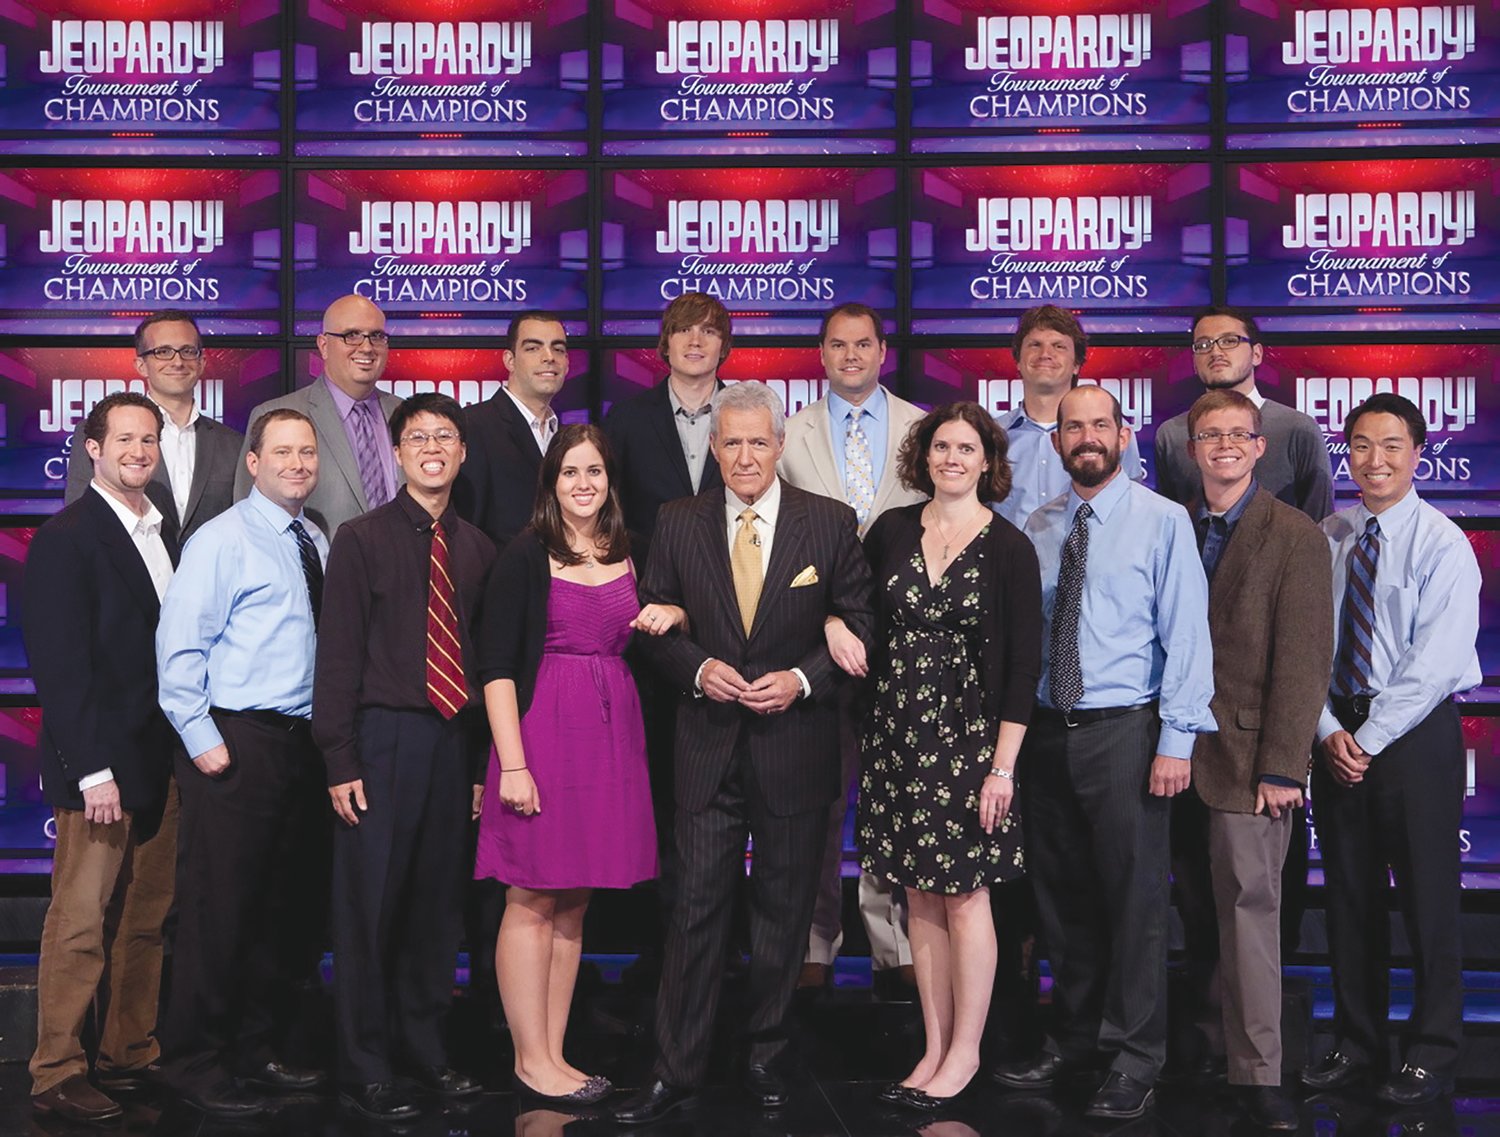 Jeopardy! host Alex Trebek; is pictured in the front row; center; with contestants from the 2011 Tournament of Champions. Crawfordsville resident Christopher Short is pictured in the back row; second from left.